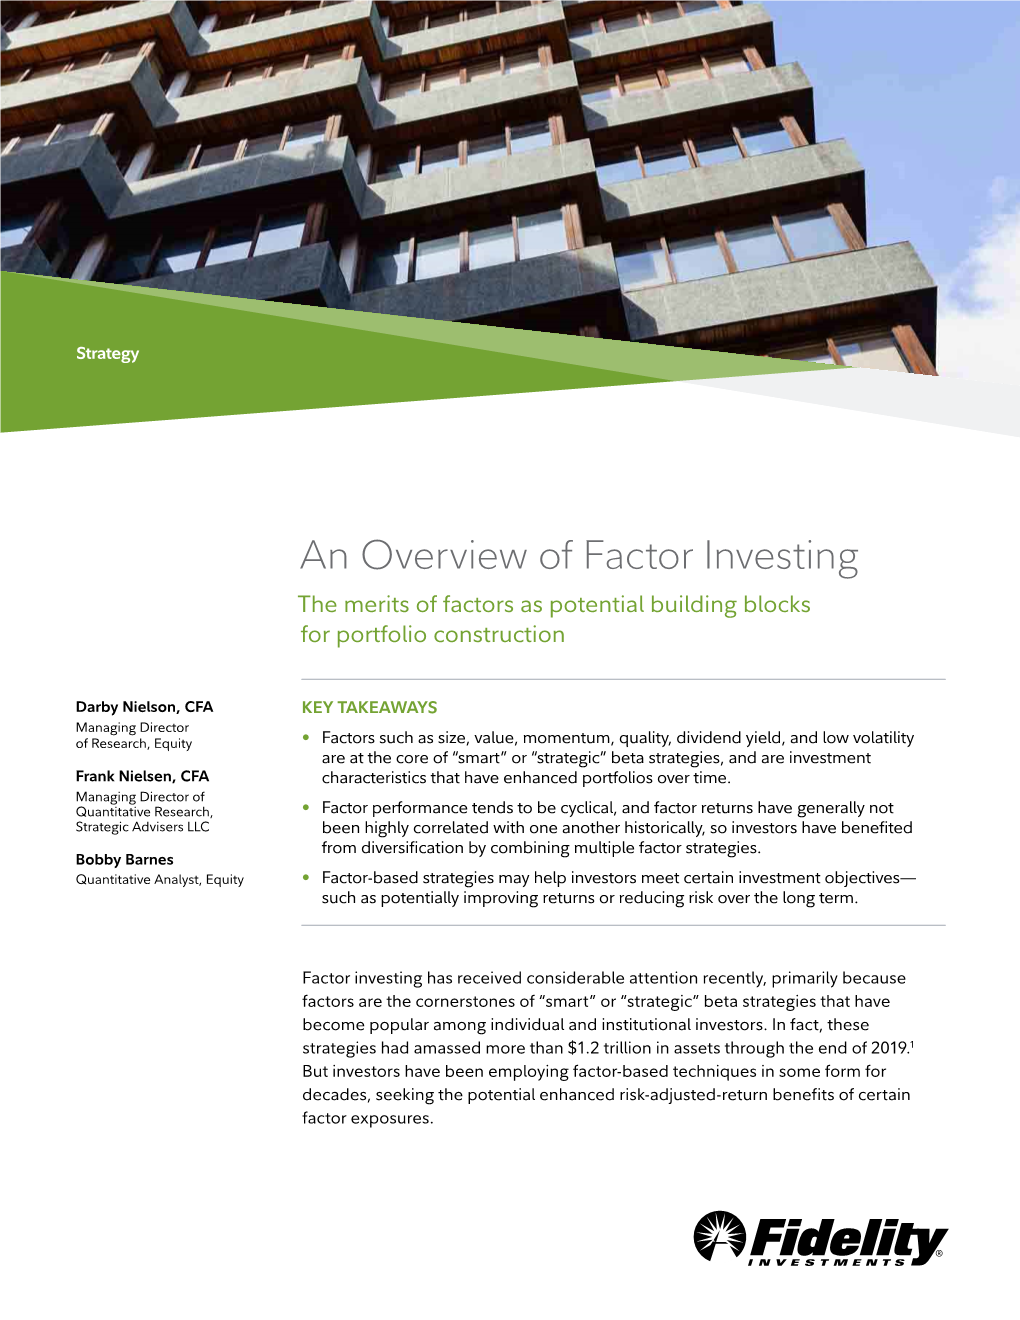 An Overview of Factor Investing the Merits of Factors As Potential Building Blocks for Portfolio Construction